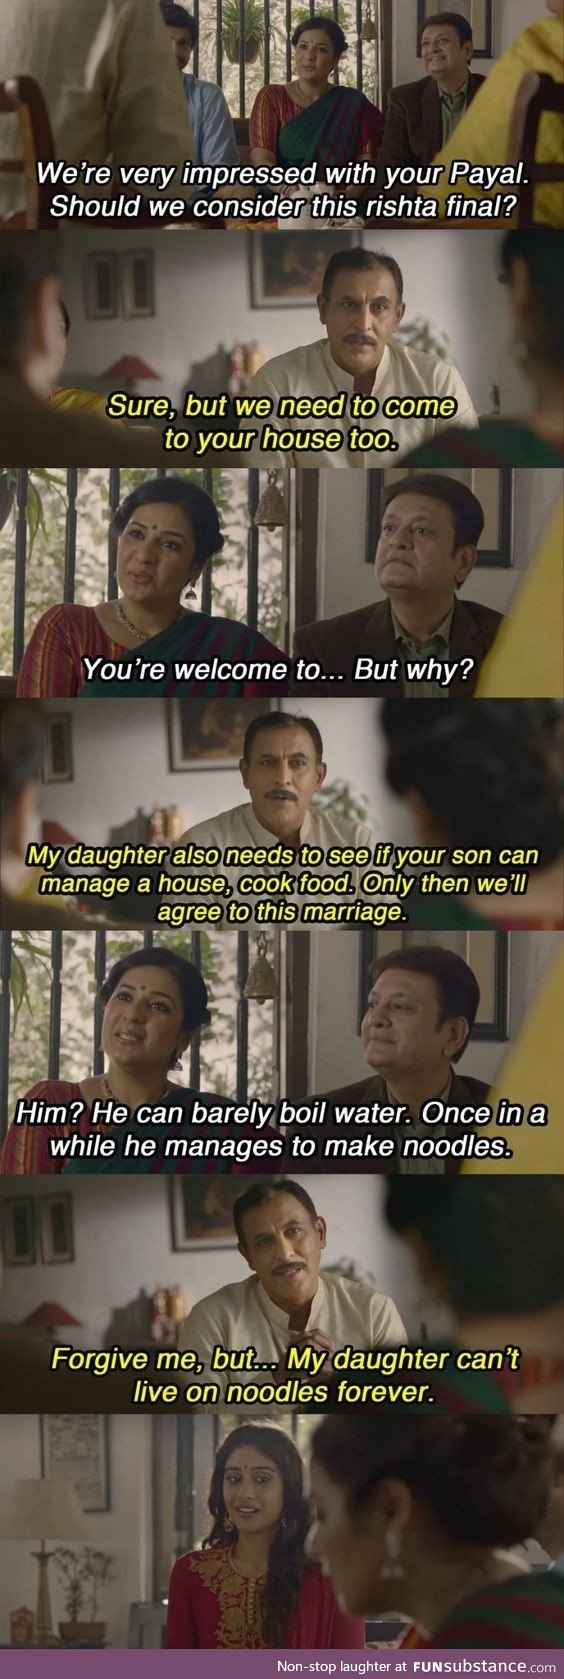 Modern arranged marriages